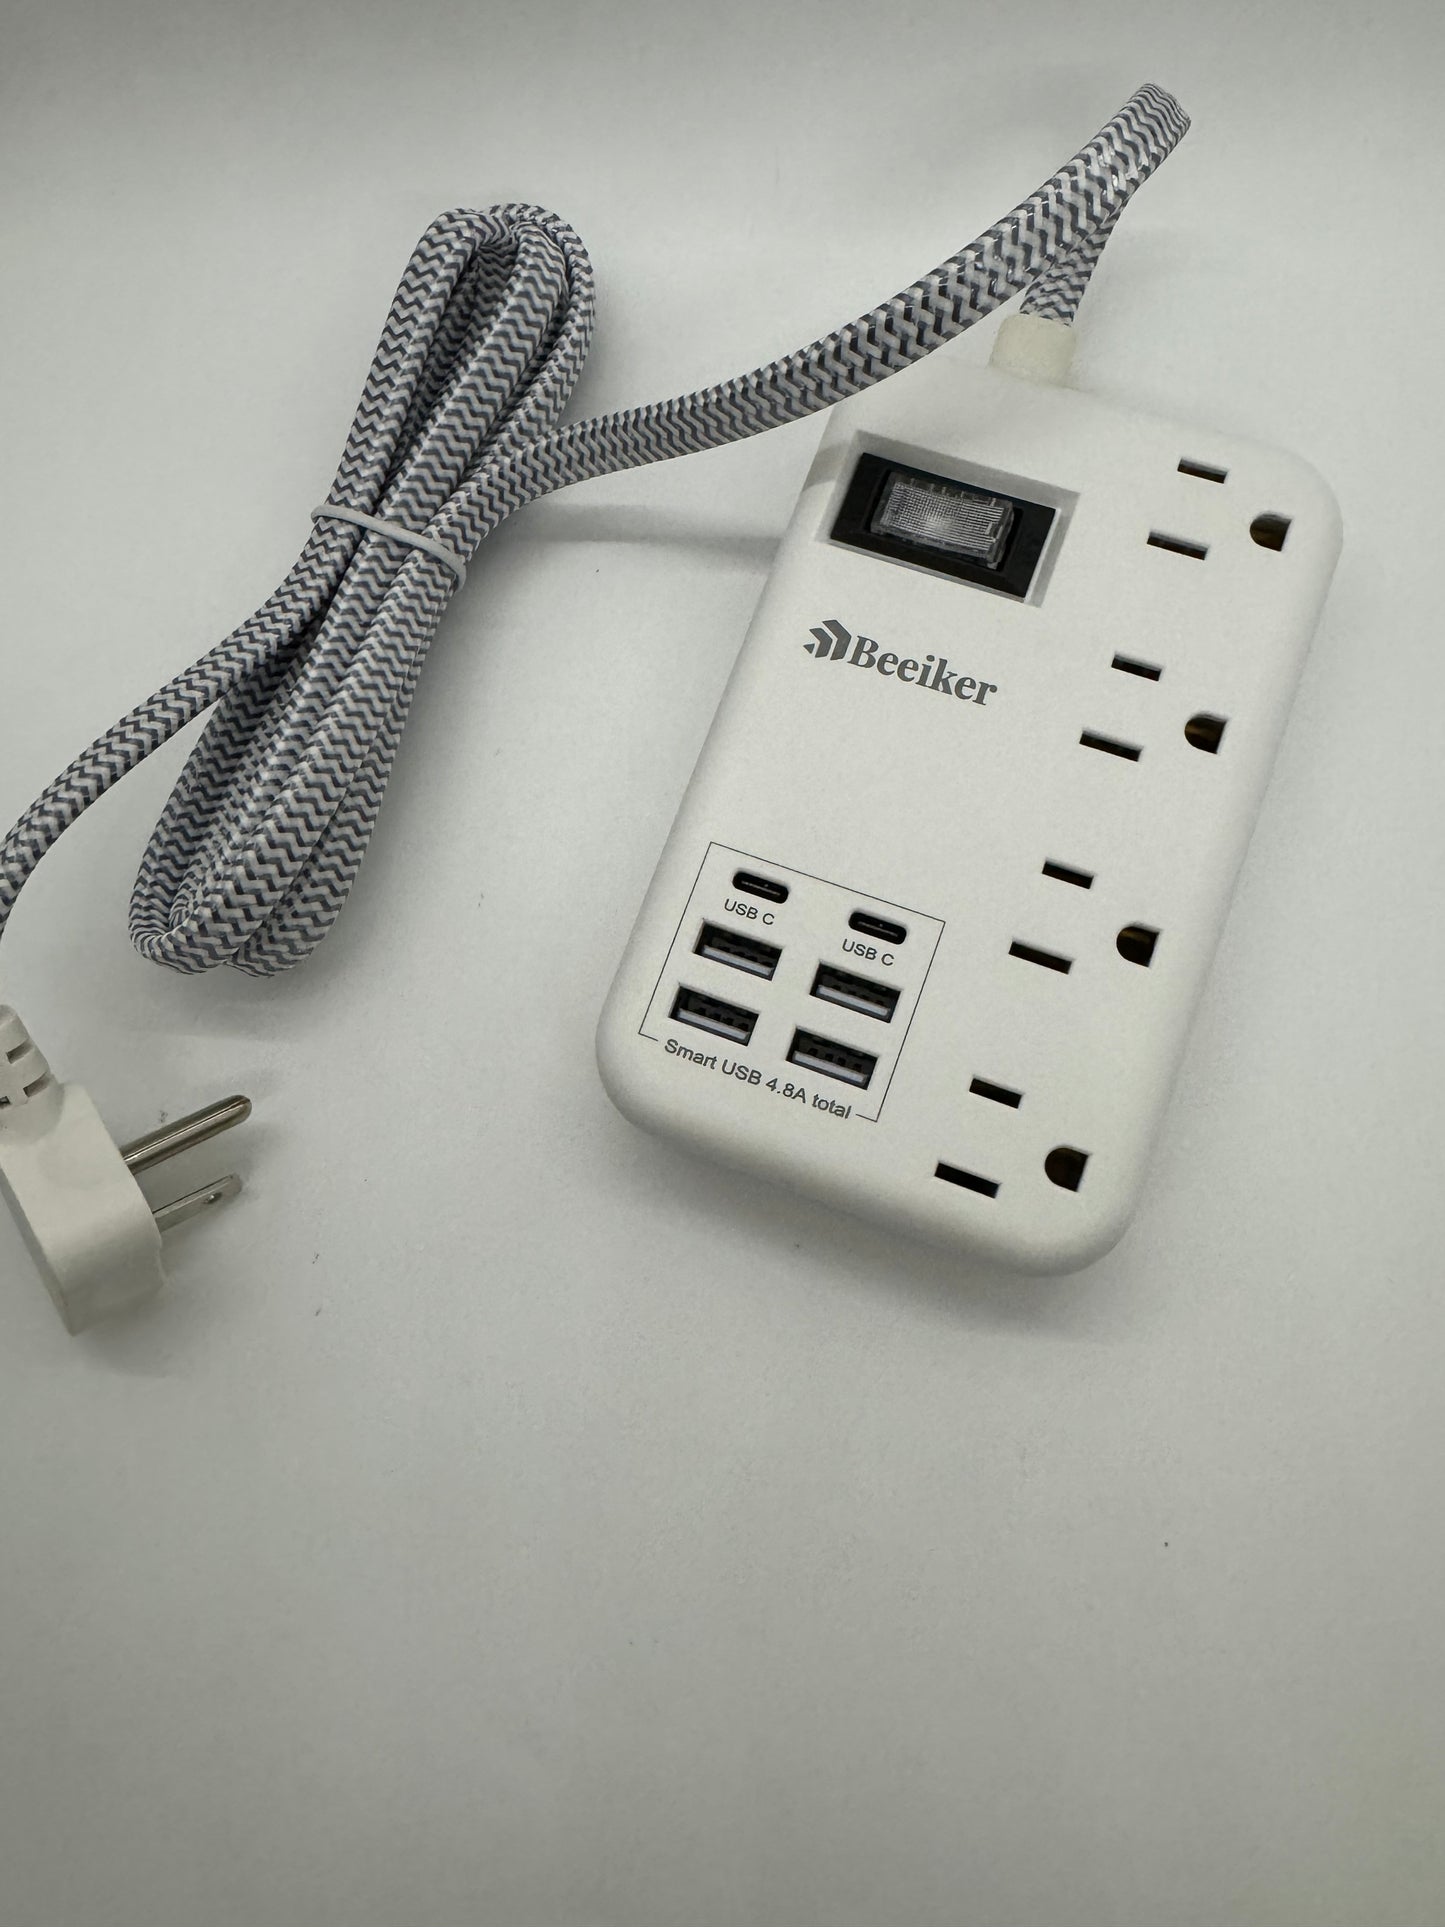 10 in 1 lightweight power strip with 980 jewels of surge protection, 4 AC outlets, 4 standard USB-A ports, and 2 USB-C ports. Power and charge up to 10 devices at one time